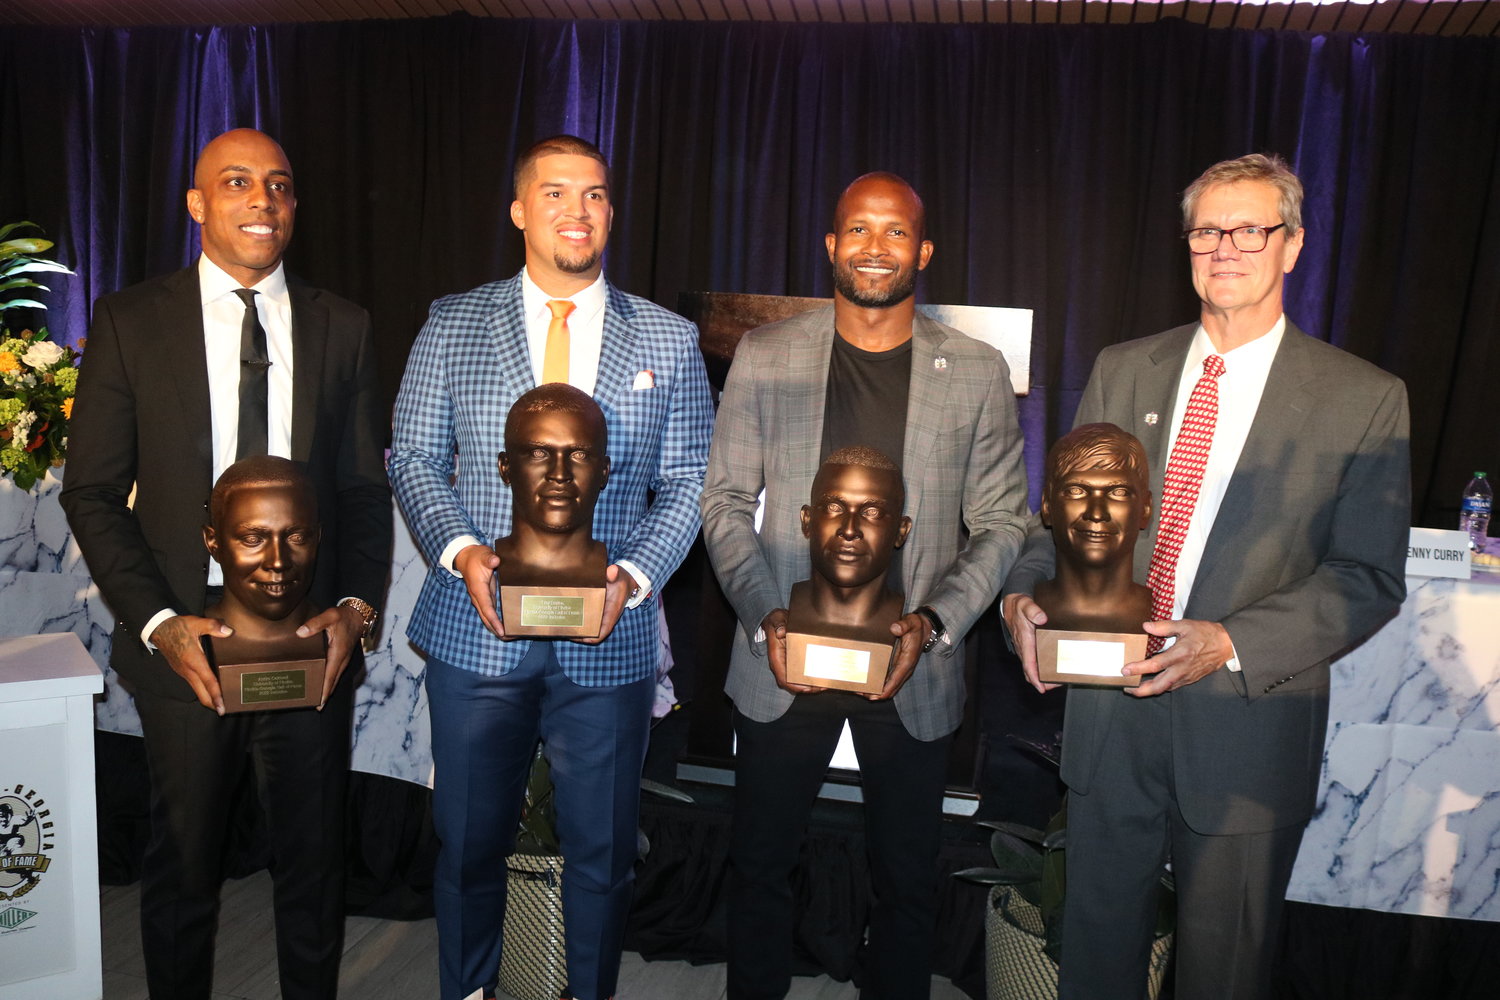 The Florida-Georgia Hall of Fame 2022 class inductees include Andre “Bubba” Caldwell and Trey Burton of Florida and Champ Bailey and John Little of Georgia.